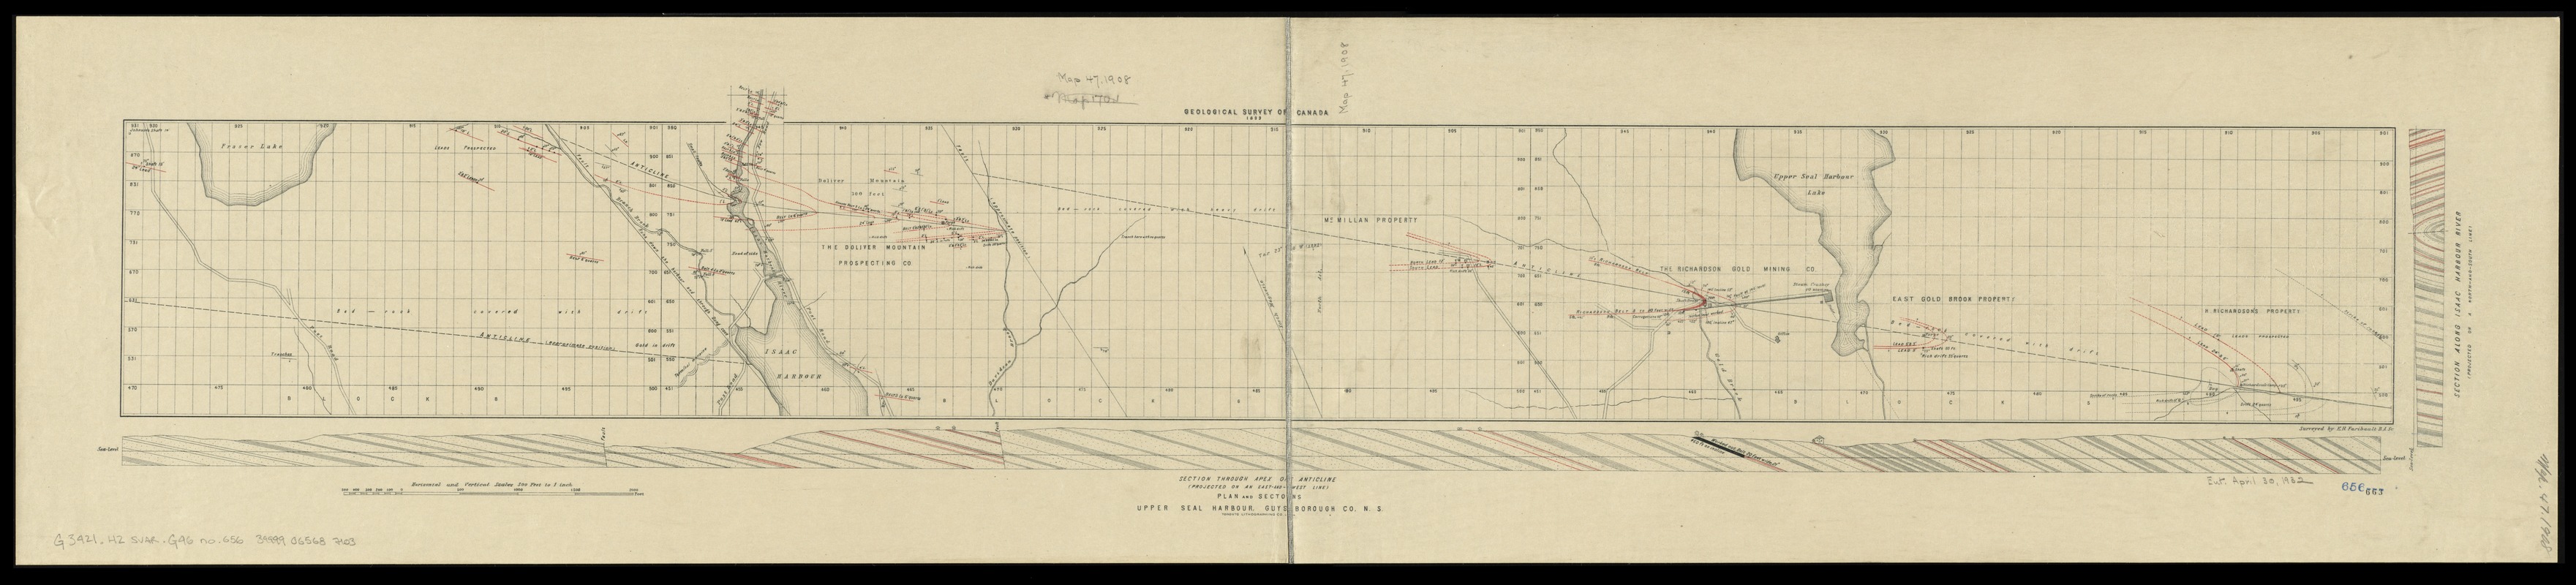 Plan and sections Upper Seal Harbour, Guysborough Co., N.S